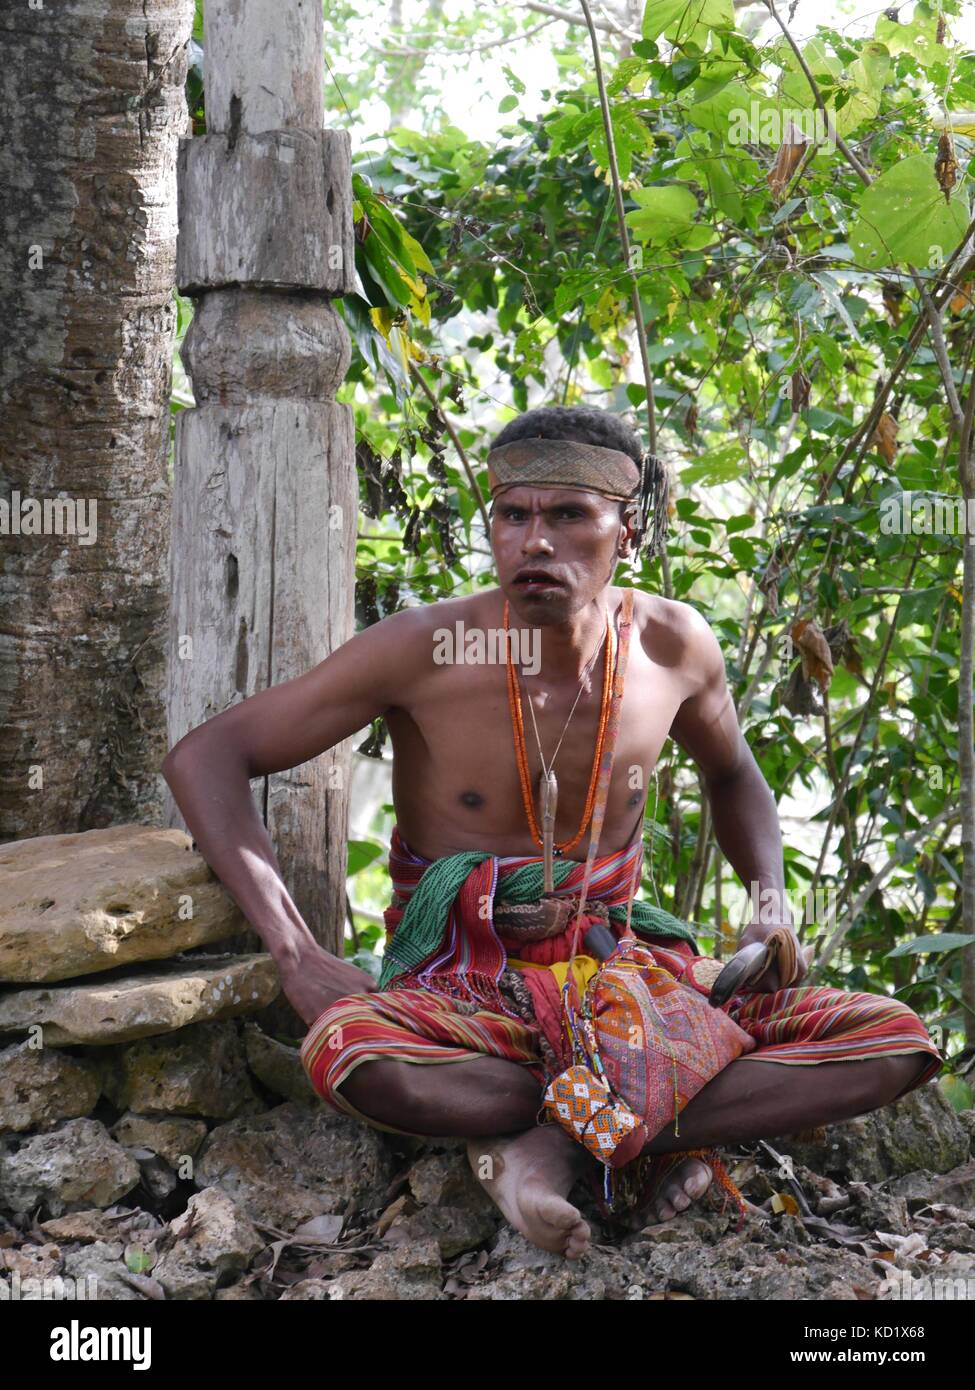 Tribesman of former headhunting None tribe, West Timor, Indonesia in  hand-woven ikat clothes with betel nut holders sitting under sacred banyan tree Stock Photo